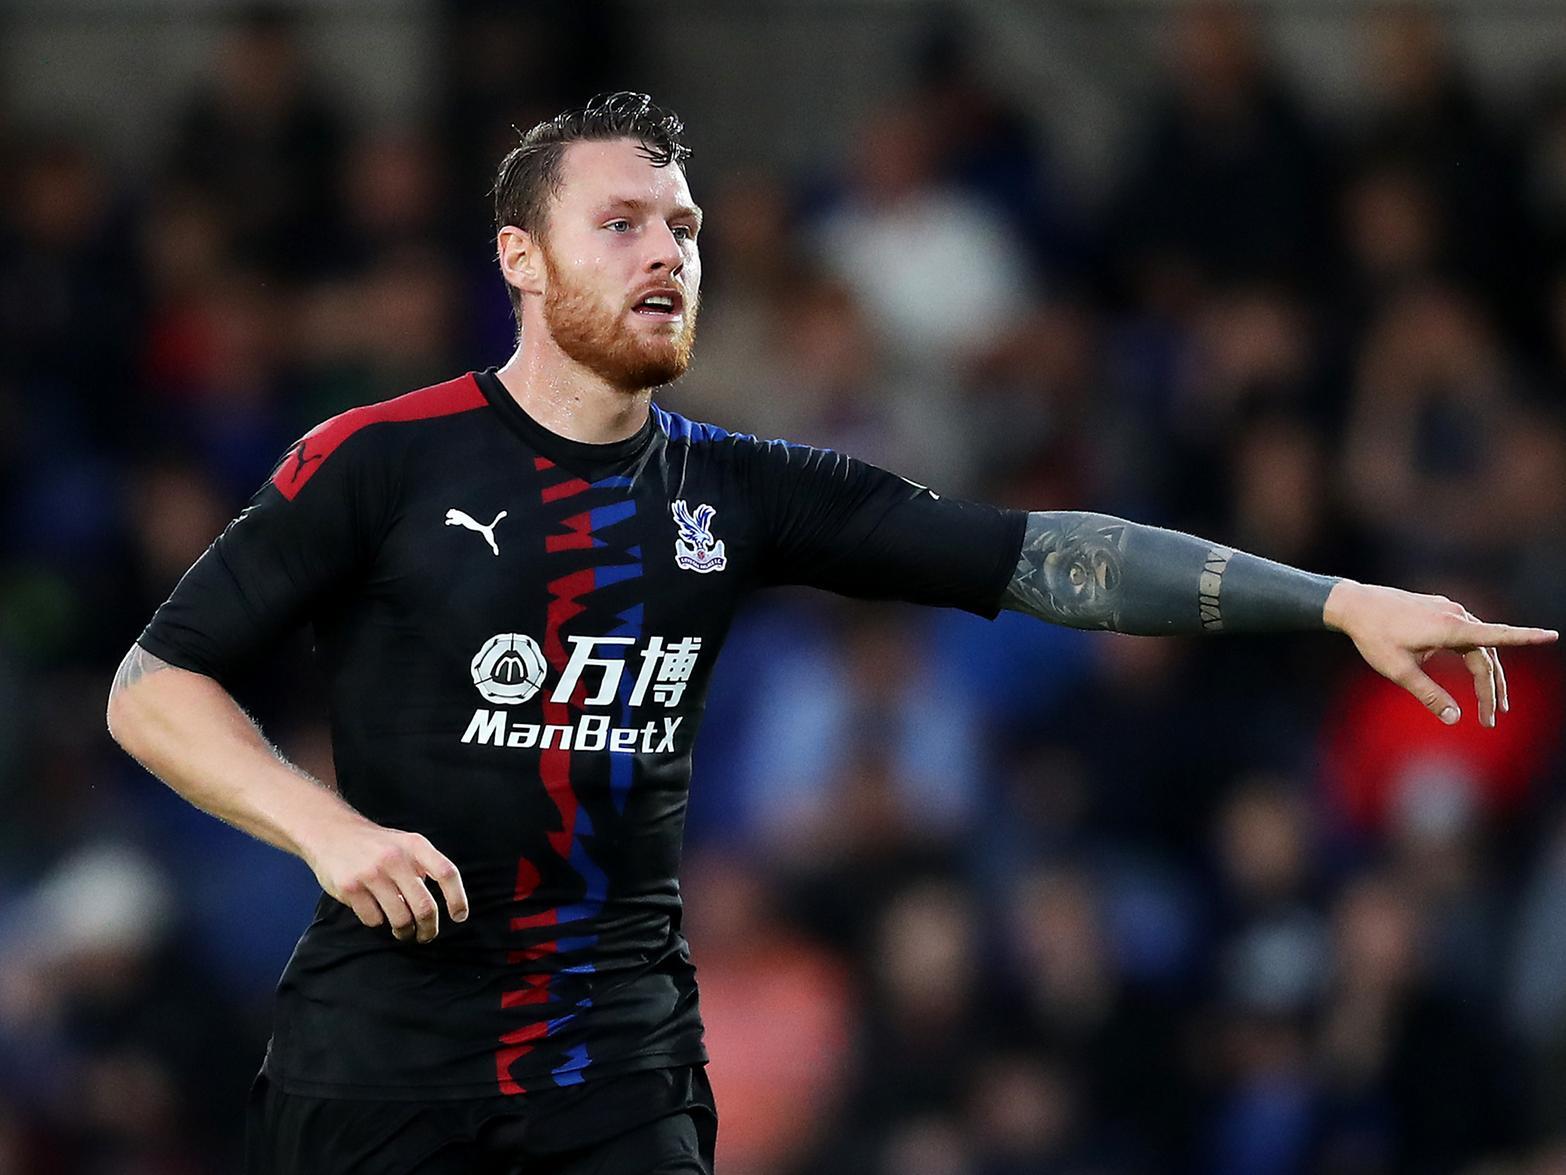 Sheffield Wednesday's hopes of securing Crystal Palace striker Connor Wickham on loan look to have been boosted, after his manager Roy Hodgson suggested that a temporary spell away would help to reignite his career. (Football London)